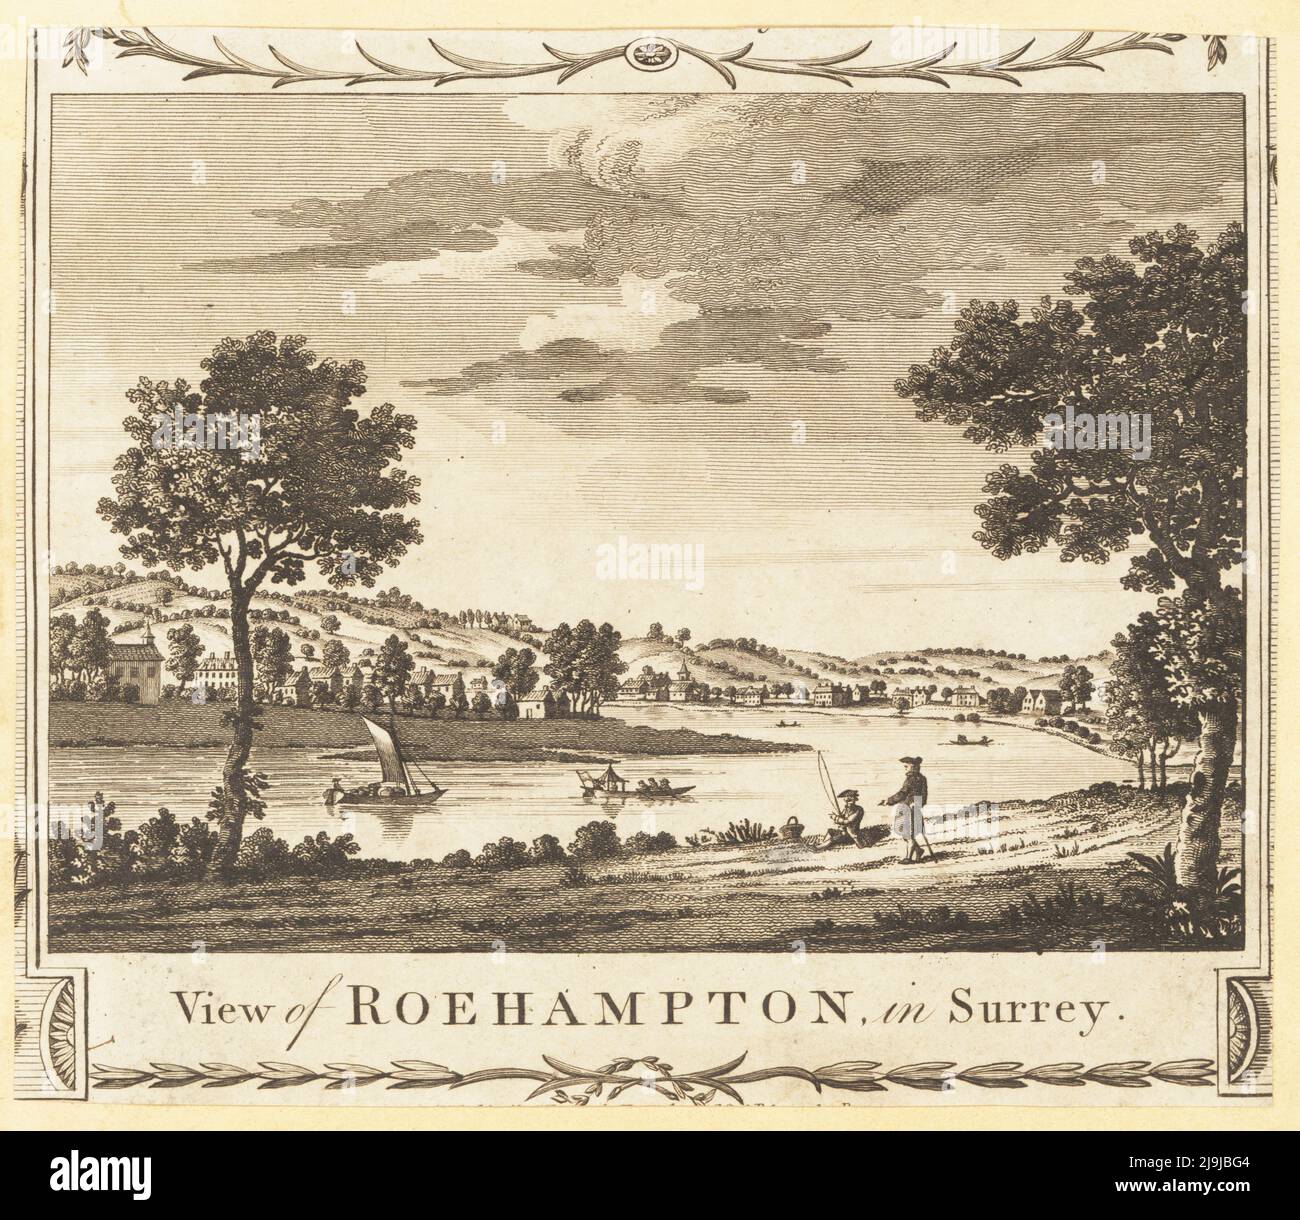 View of the River Thames near the village of Roehampton, 1784. Men fishing on the river banks, ferry boats and sailboats on the river. View of Roehampton in Surrey. Copperplate engraving from William Thornton’s New, Complete and Universal History of the City of London, Alexander Hogg, King's Arms, No. 16 Paternoster Row, London, 1784. Stock Photo